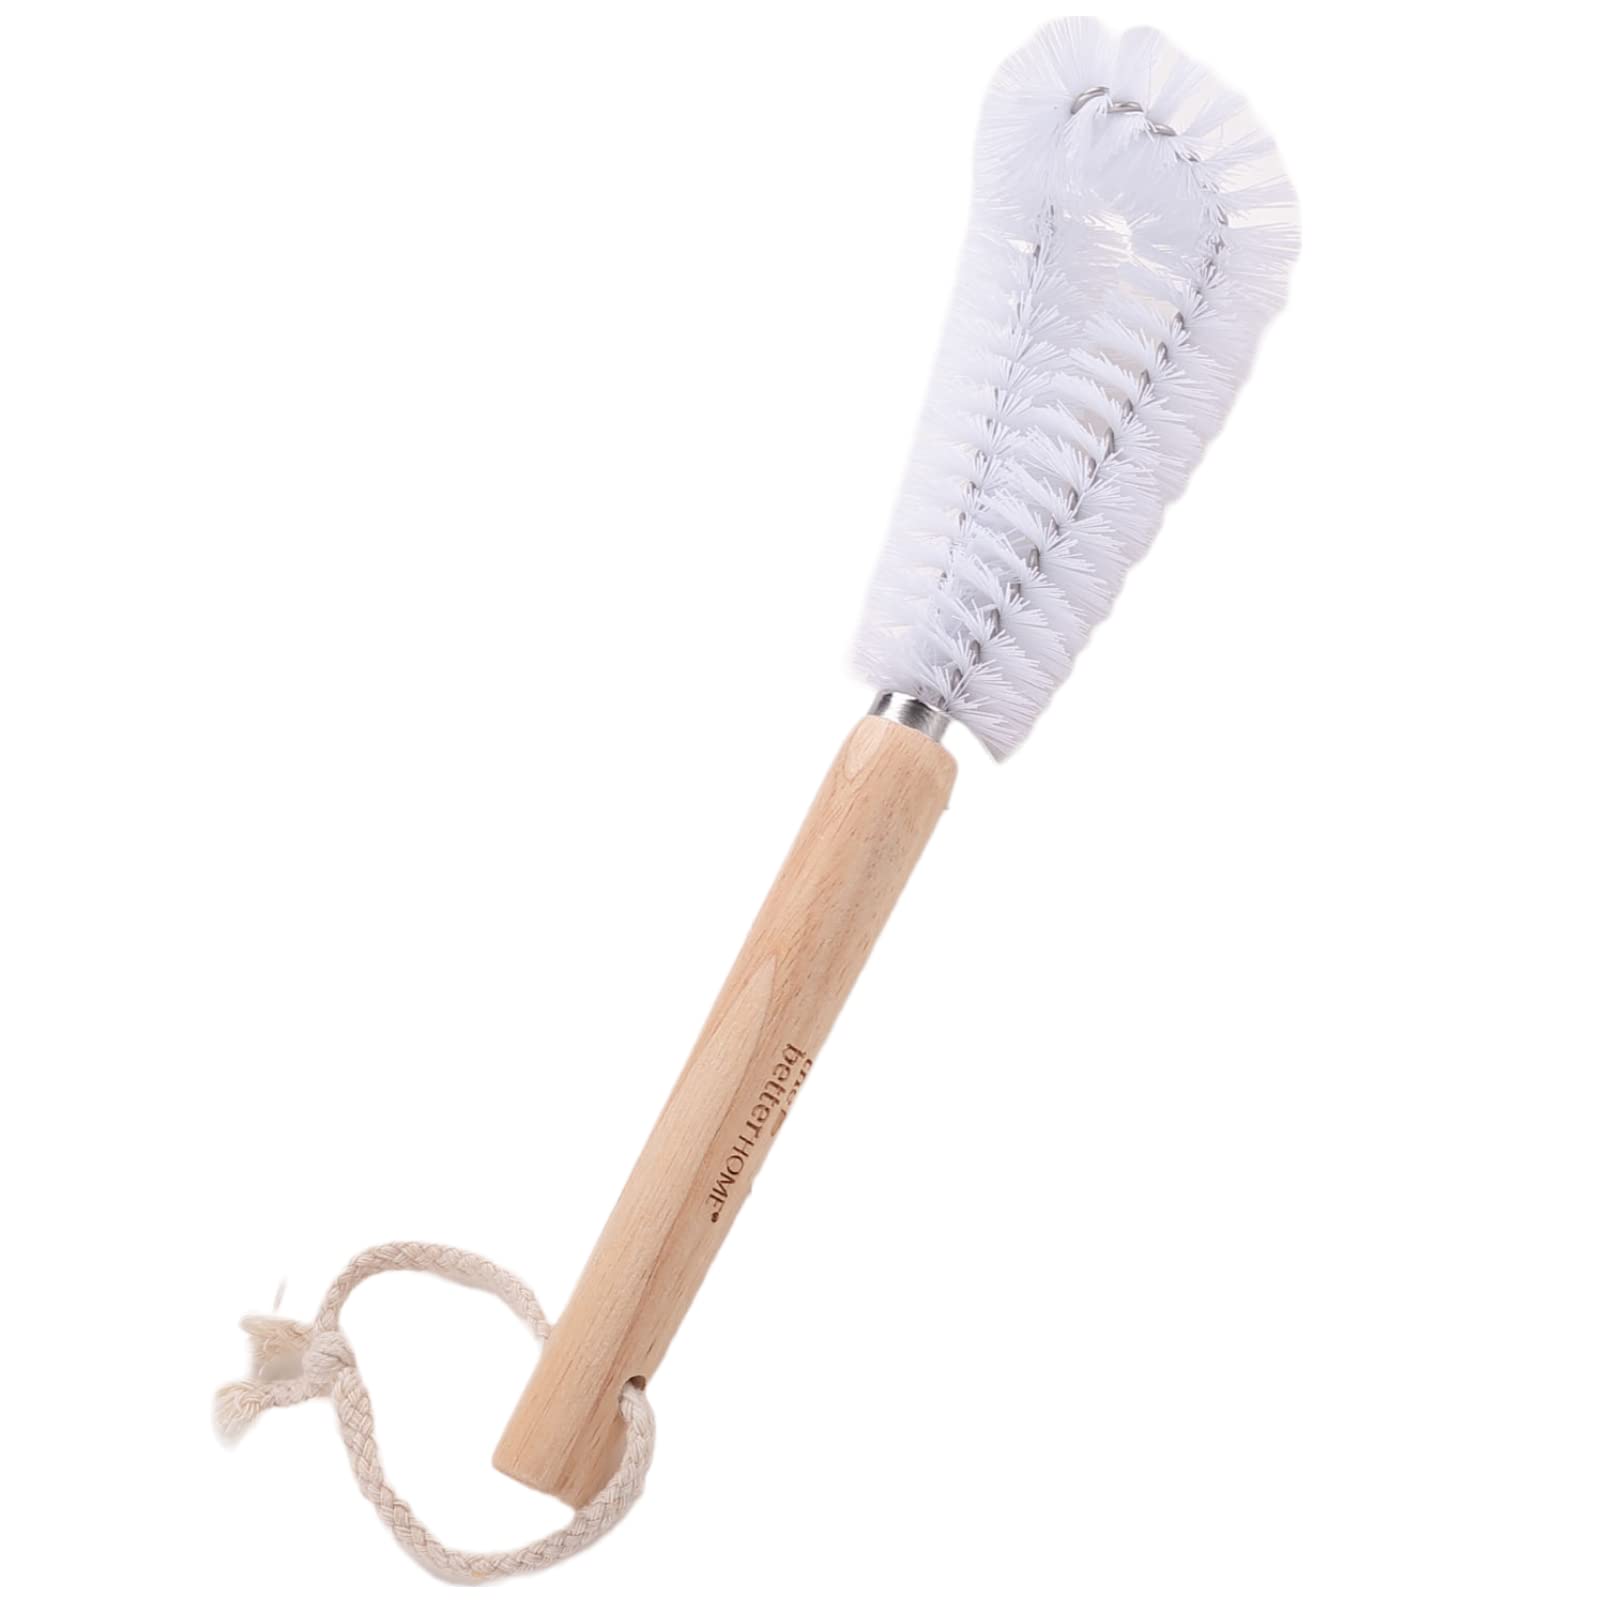 Glass and Bottle Cleaning Brush | Normal and Baby Bottle Cleaner Brush | Sleek Wooden Handle & Ultra Soft Bristles